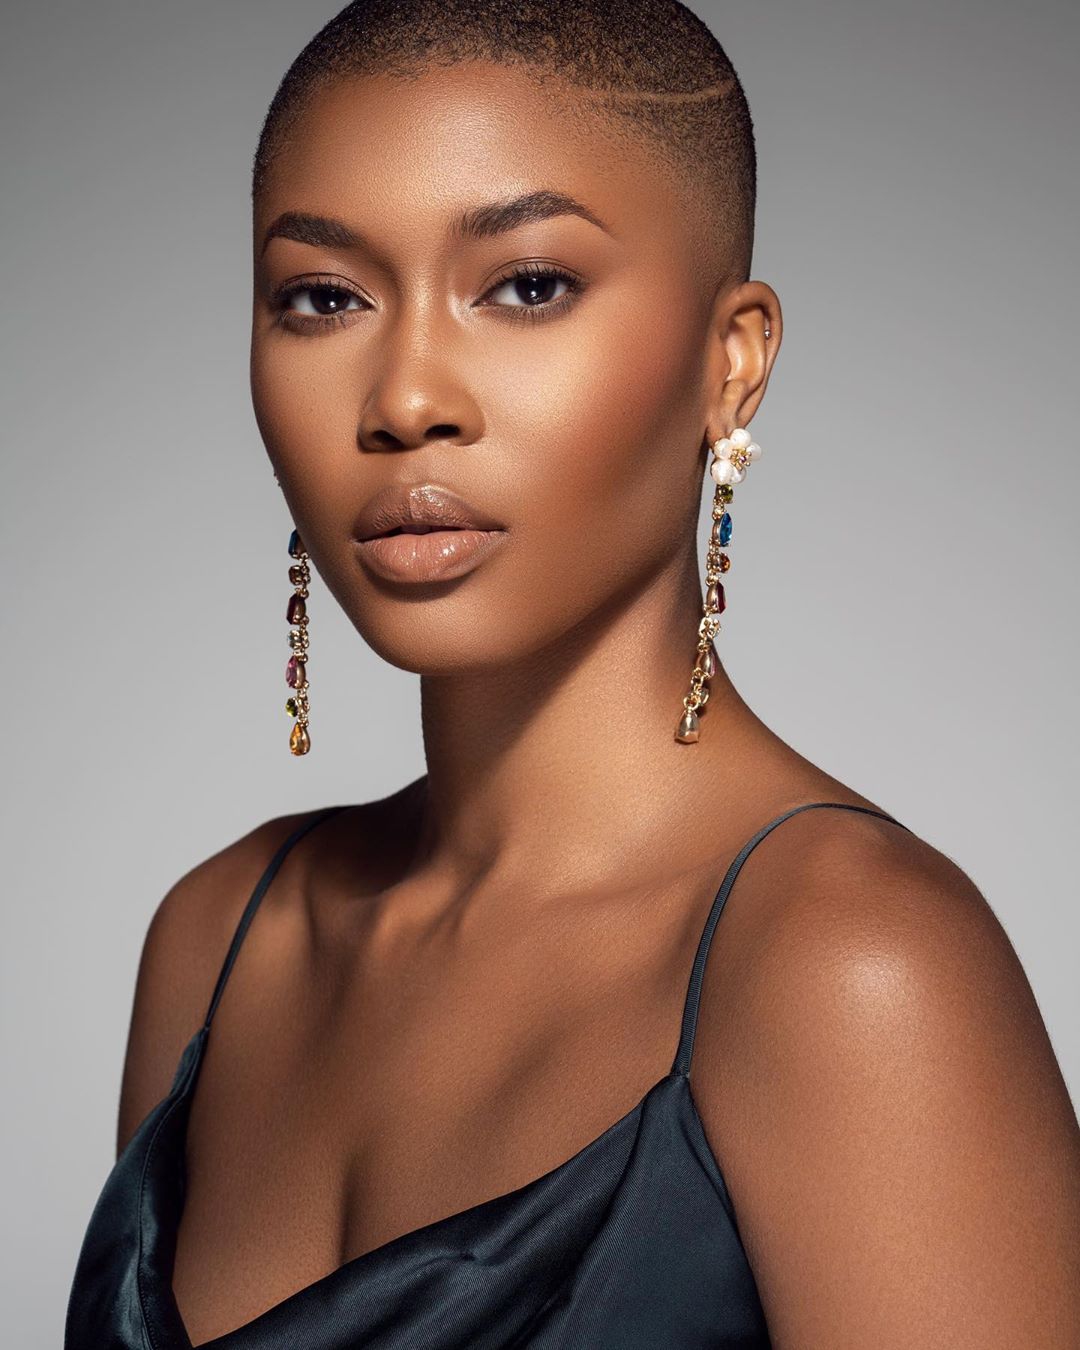 Influencers who nailed the baldie look